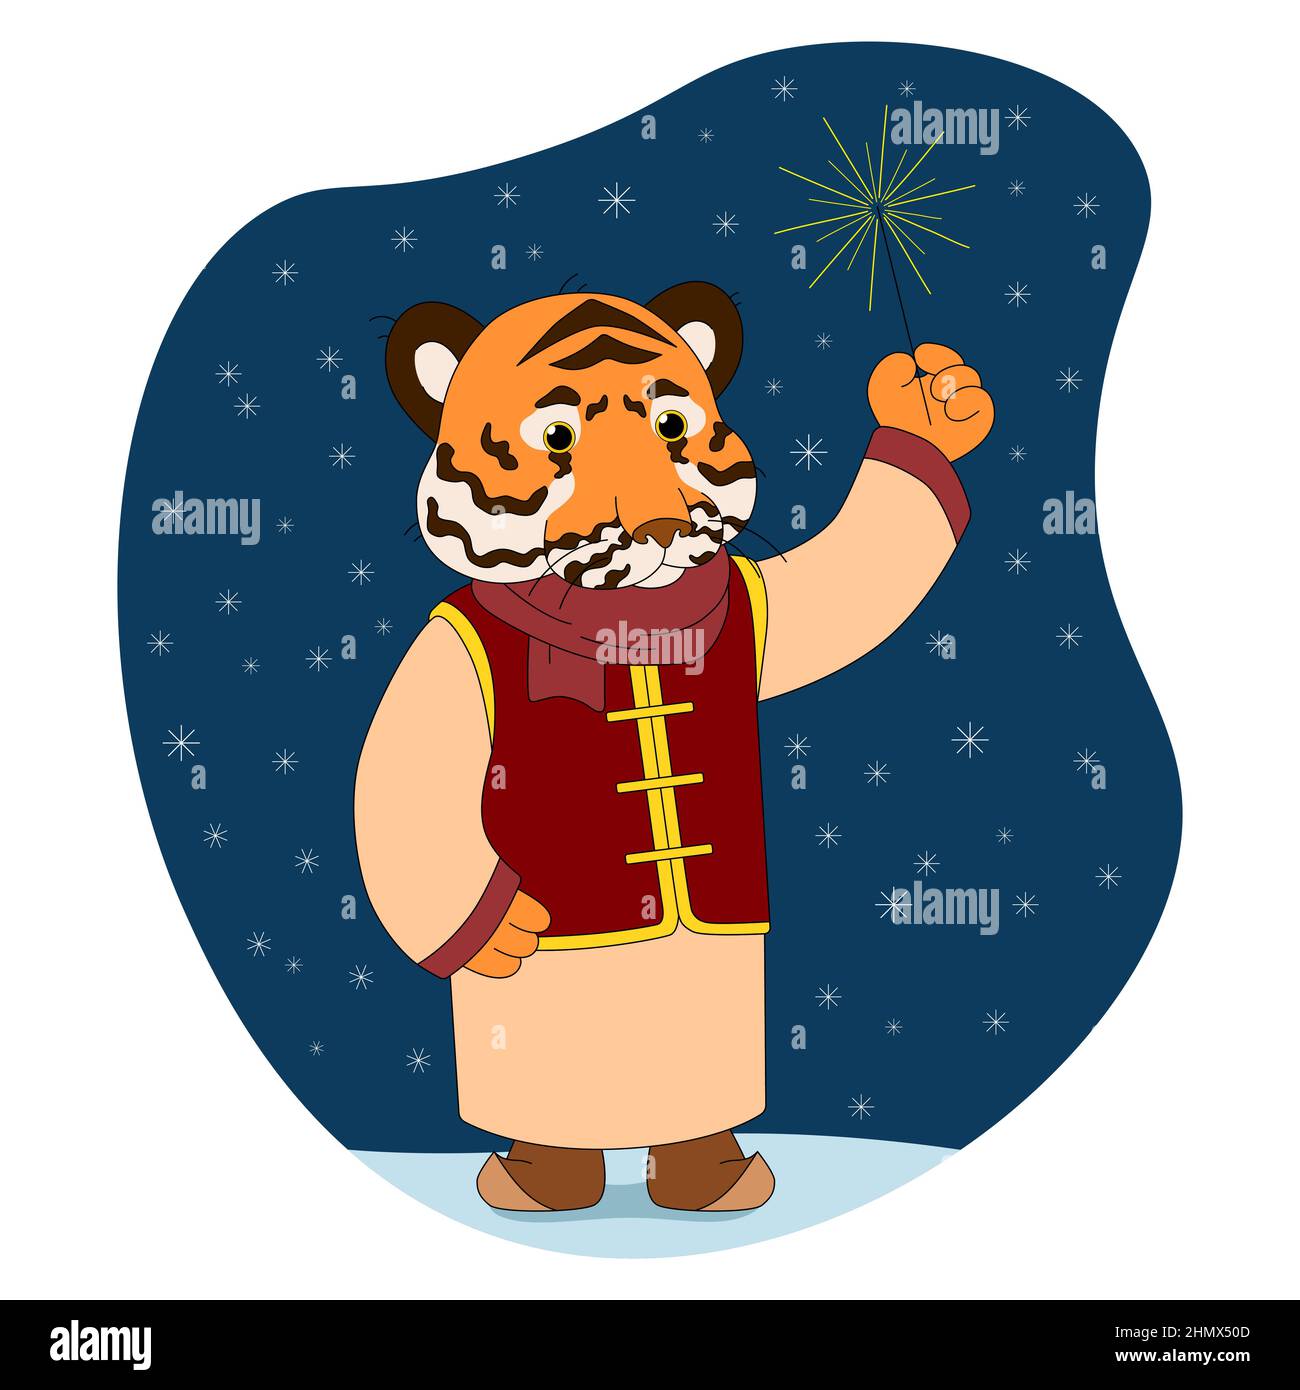 Colorful illustration of tiger for Chinese New year. The symbol of the year 2022 according to the Lunisolar Chinese calendar. Cute vector animal in ca Stock Vector